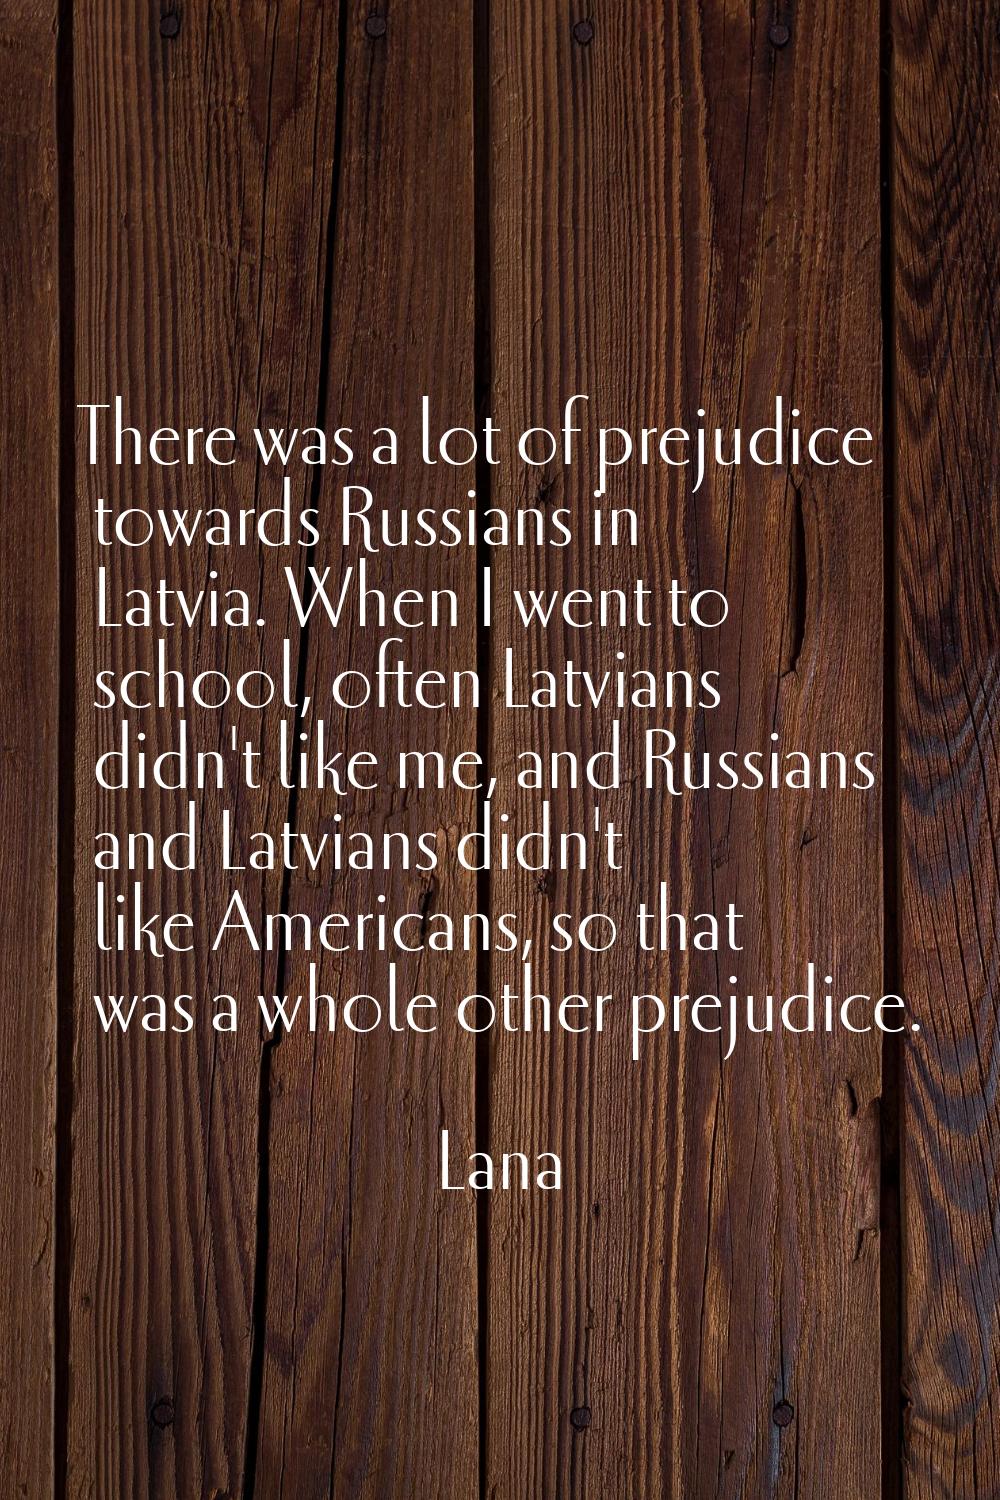 There was a lot of prejudice towards Russians in Latvia. When I went to school, often Latvians didn